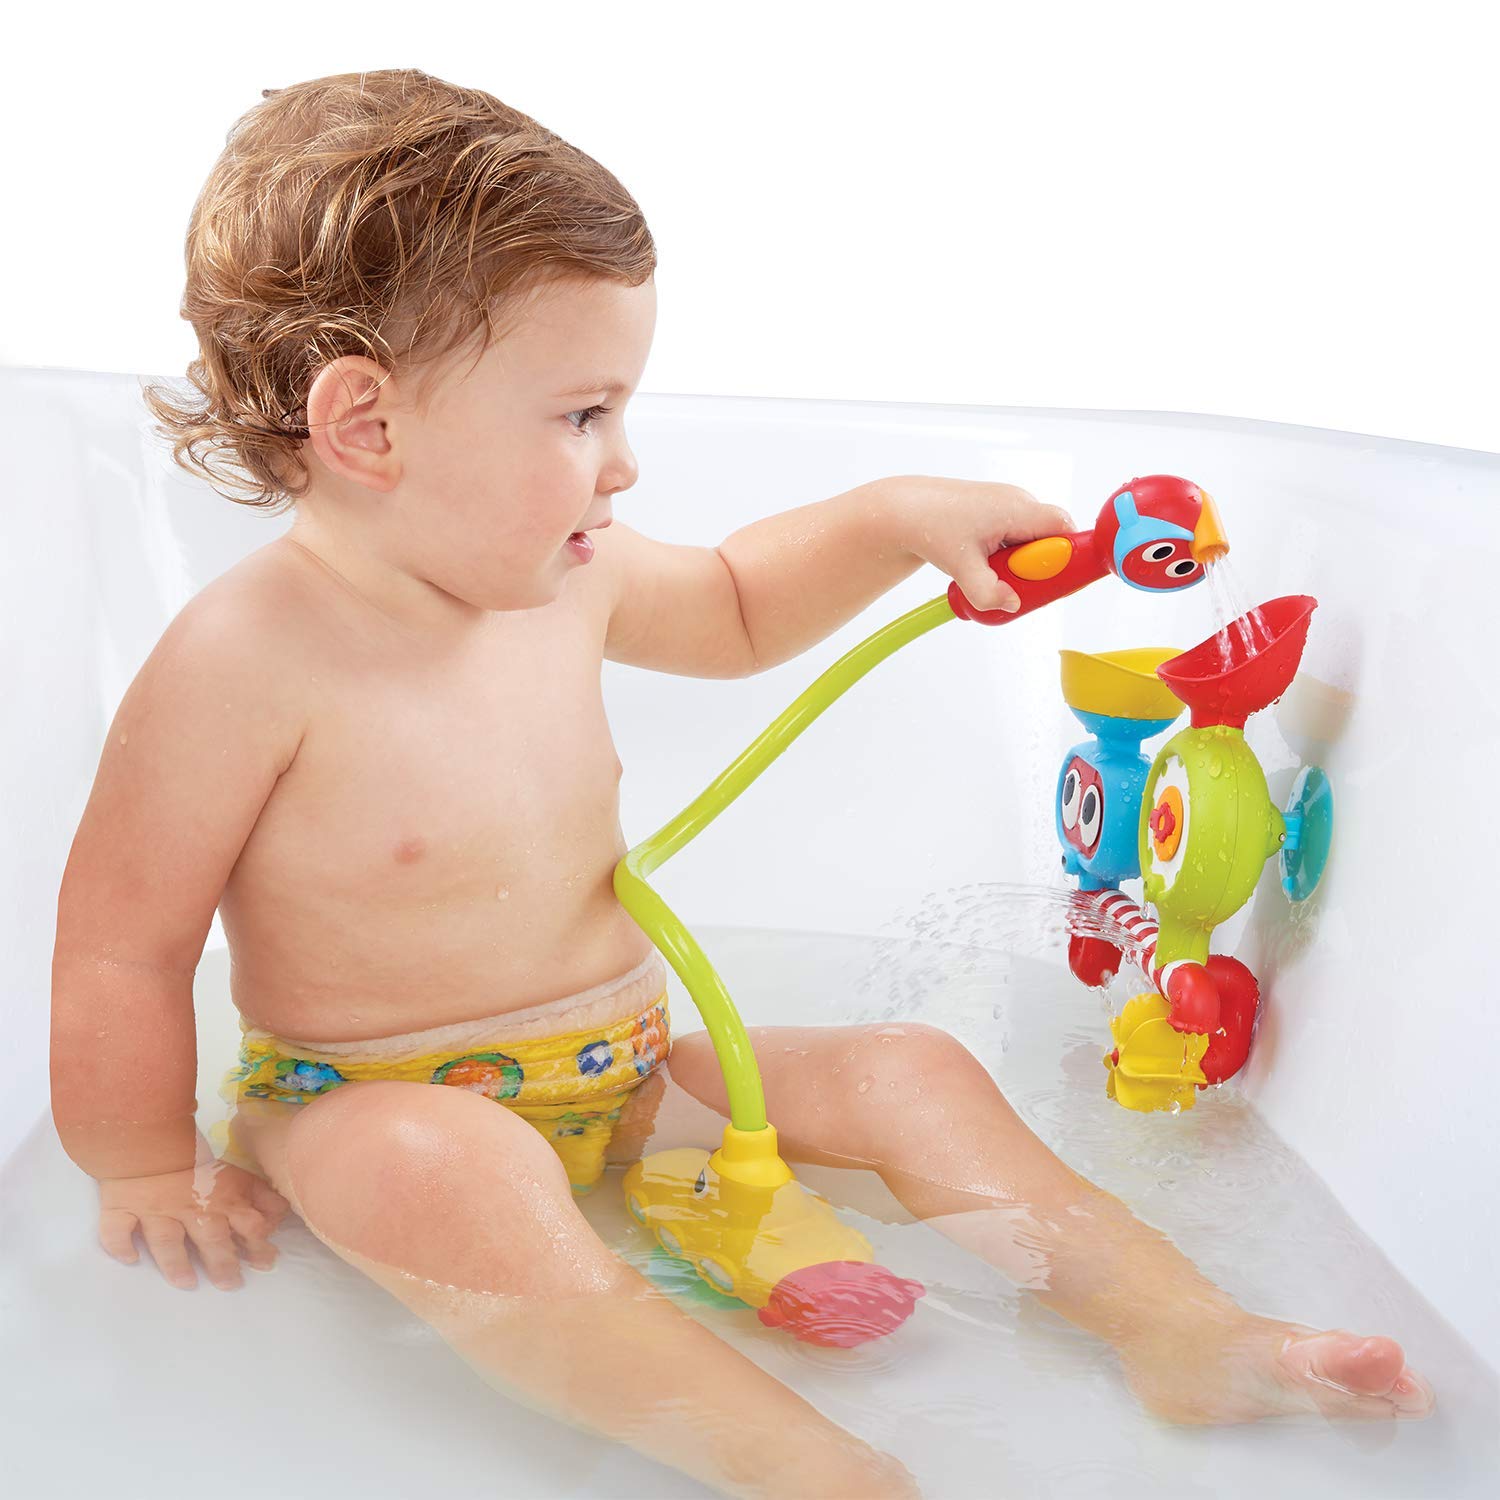 Yookidoo Kids Bath Toy - Submarine Spray Station - Battery Operated Water Pump with Hand Shower for Bathtime Play - Generates Magical Effects (Age 2-6 Years)